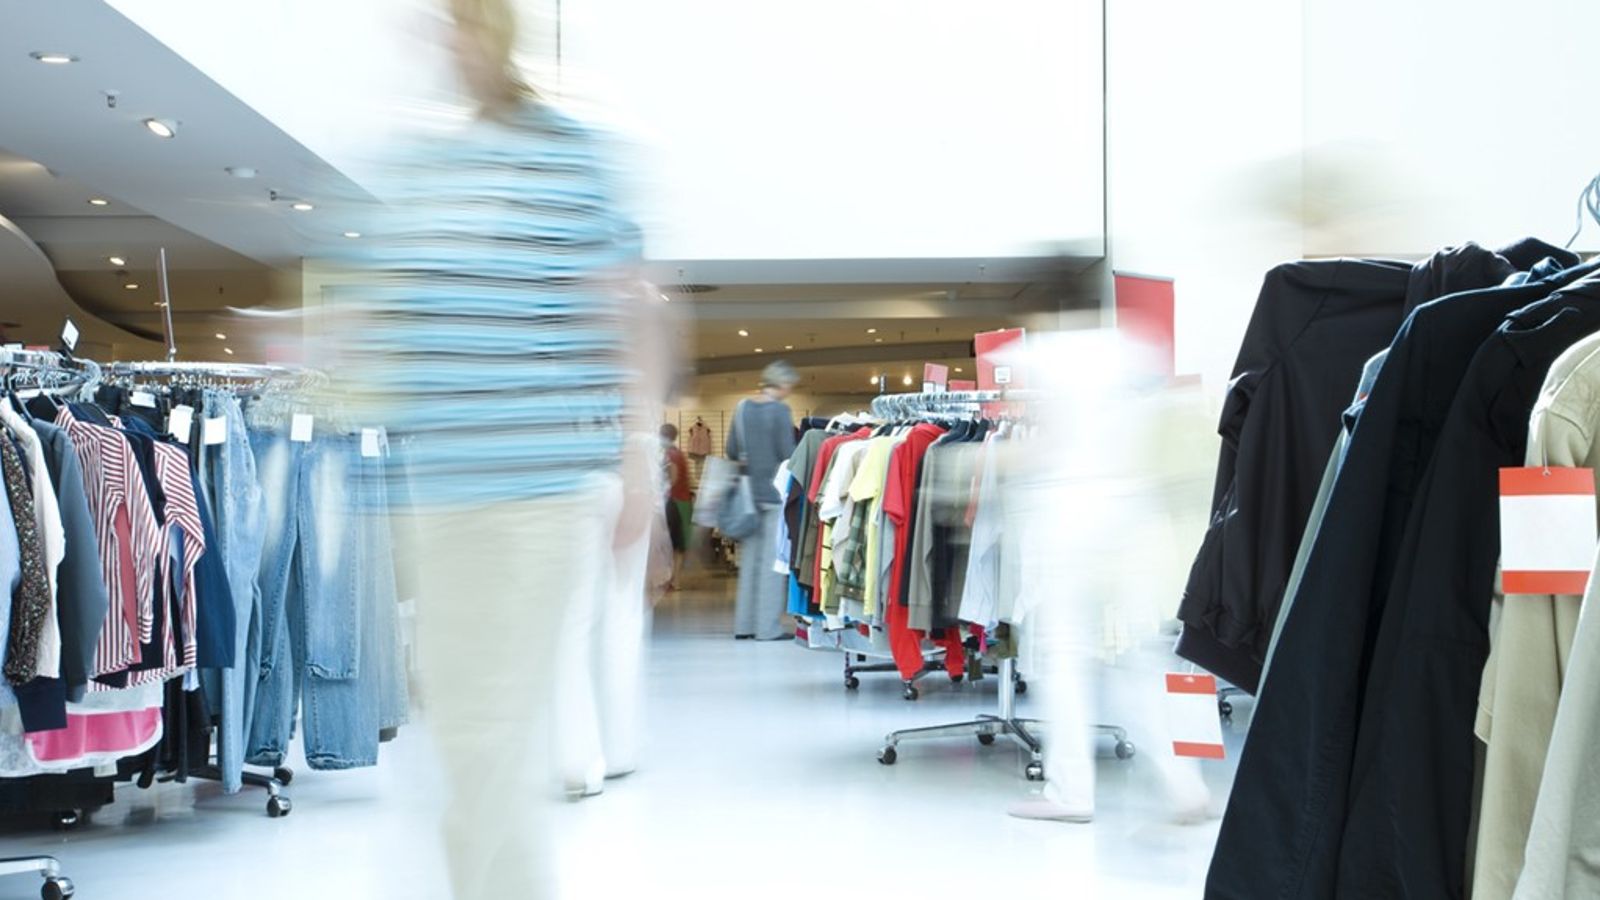 Slippery floors and a burst of heat: Tricks shops use to get you to spend more